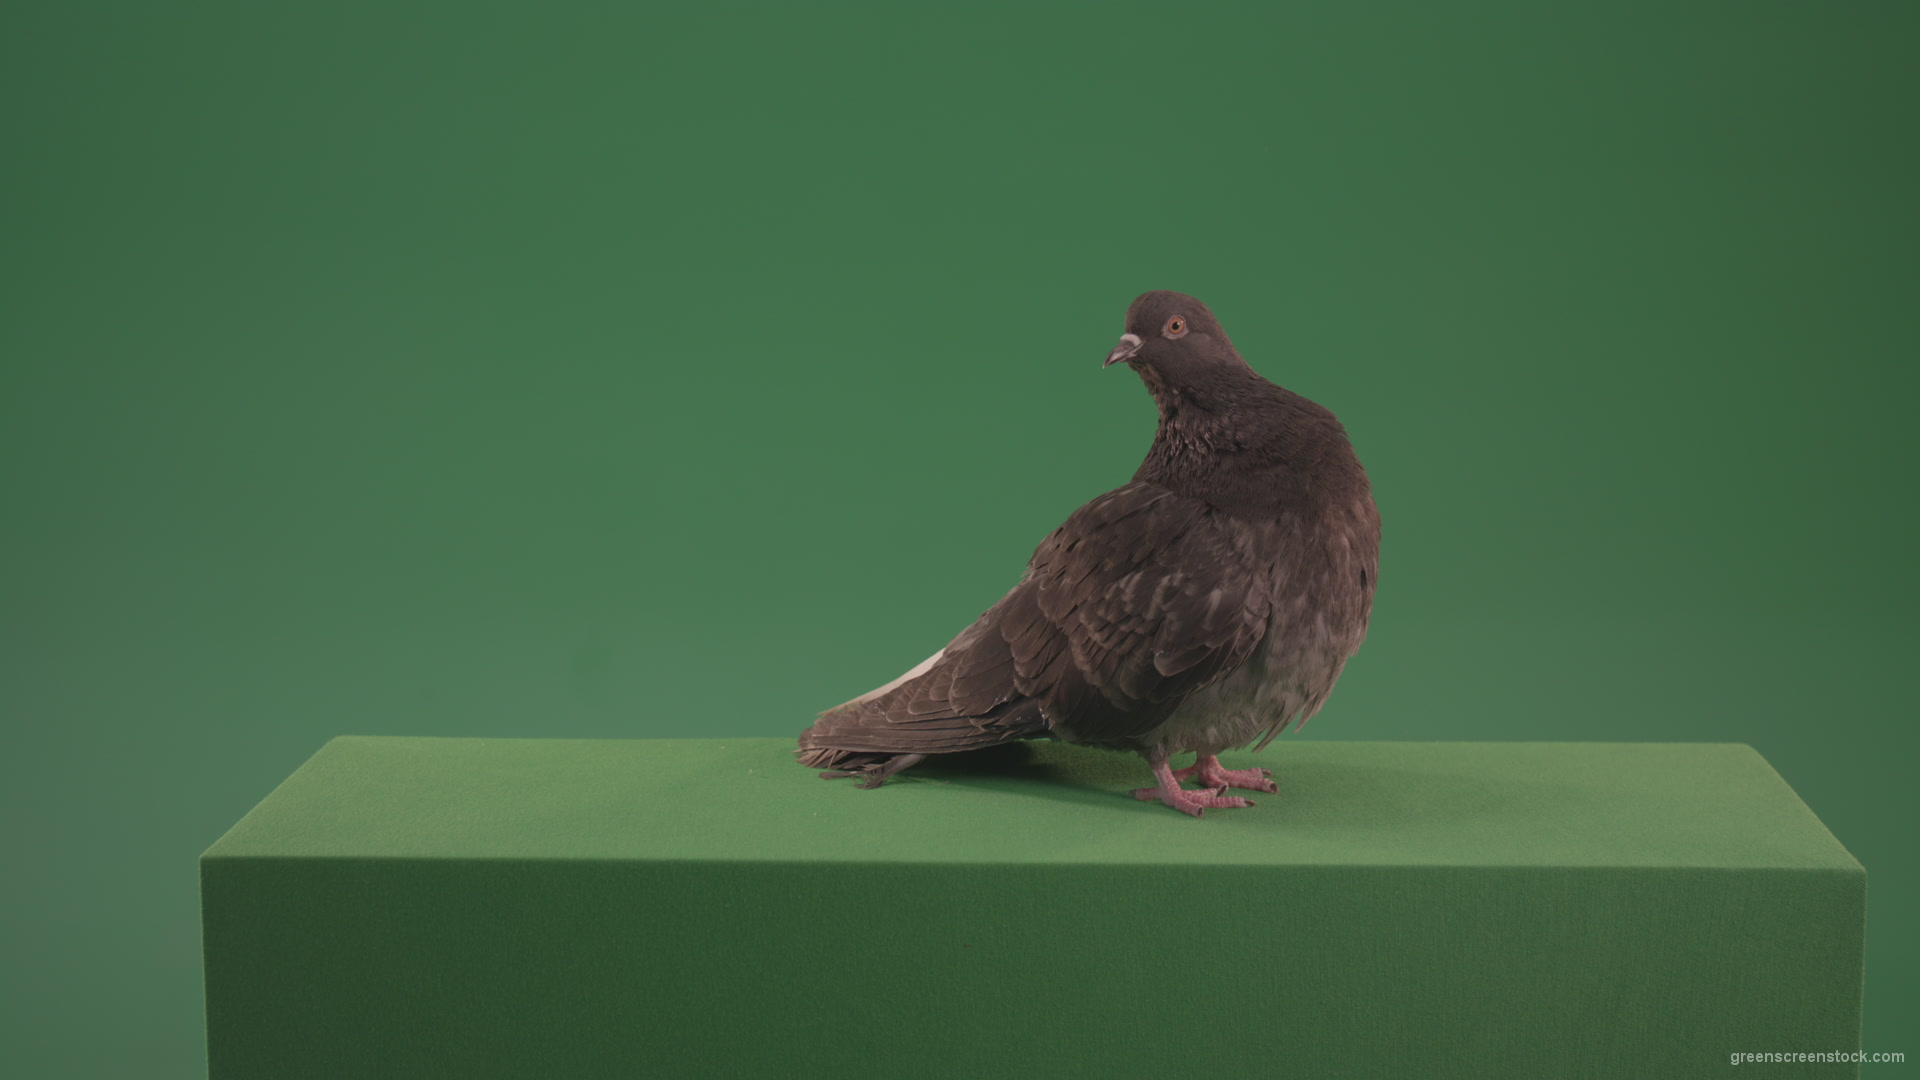 Bird-landed-and-inspected-the-territory-isolated-on-chromakey-background_002 Green Screen Stock